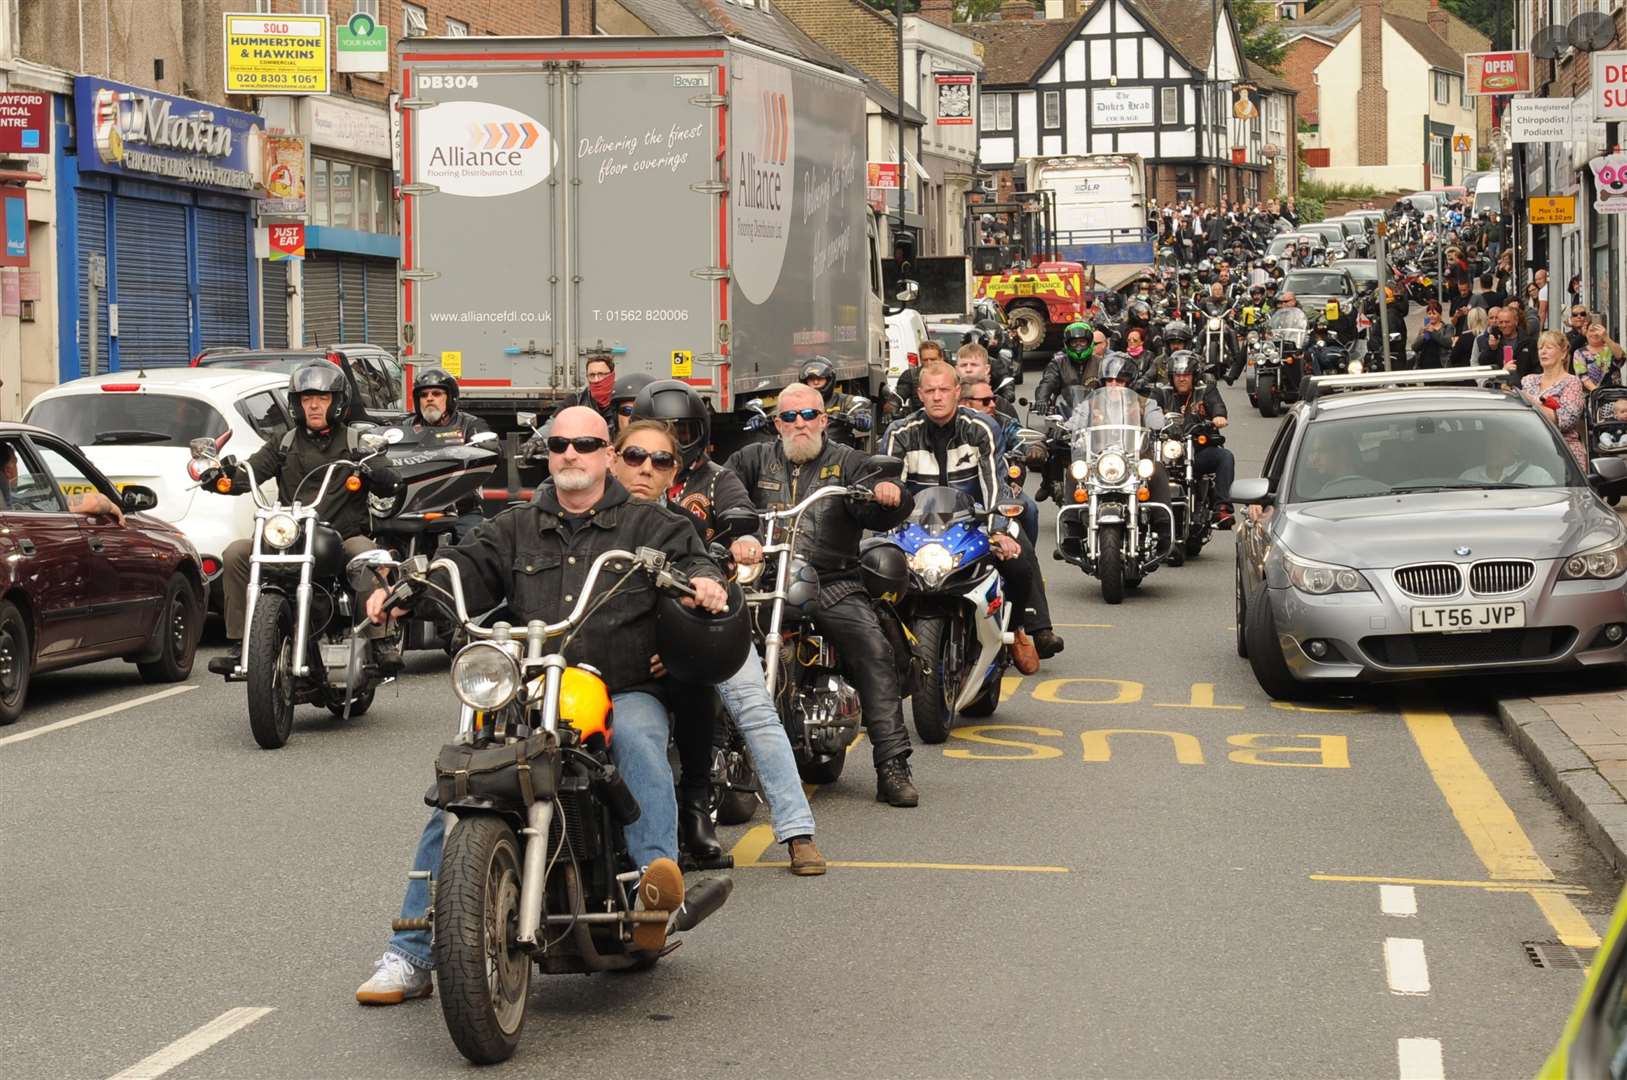 Bikers flooded into Crayford for the funeral of Ollie Jennings.